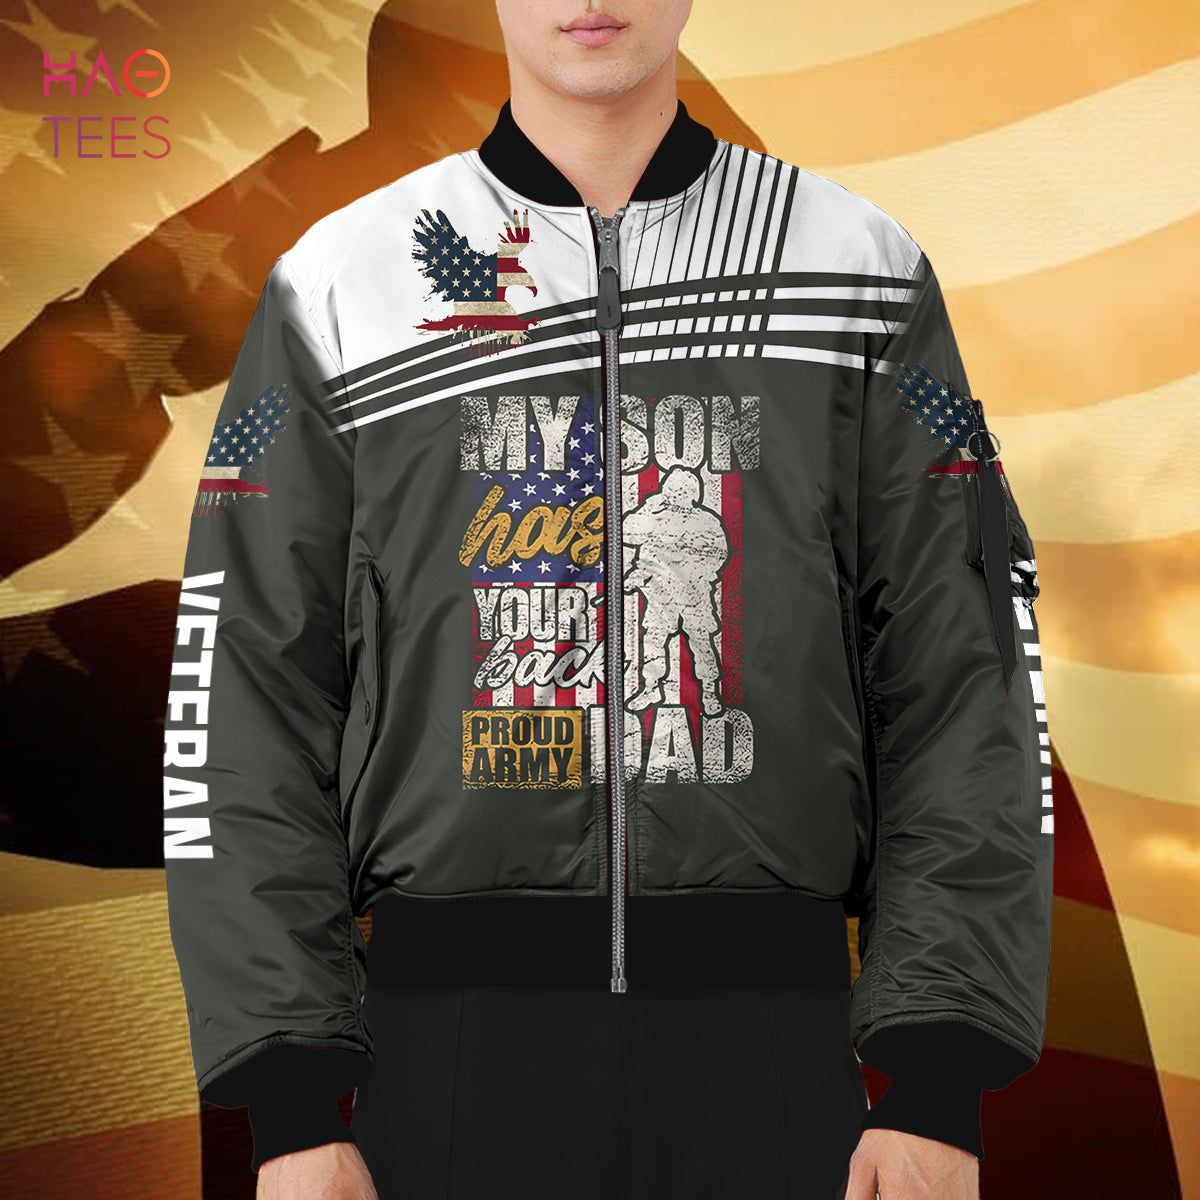 NEW My Son Has Your Back Proud Army Dad 3D Bomber